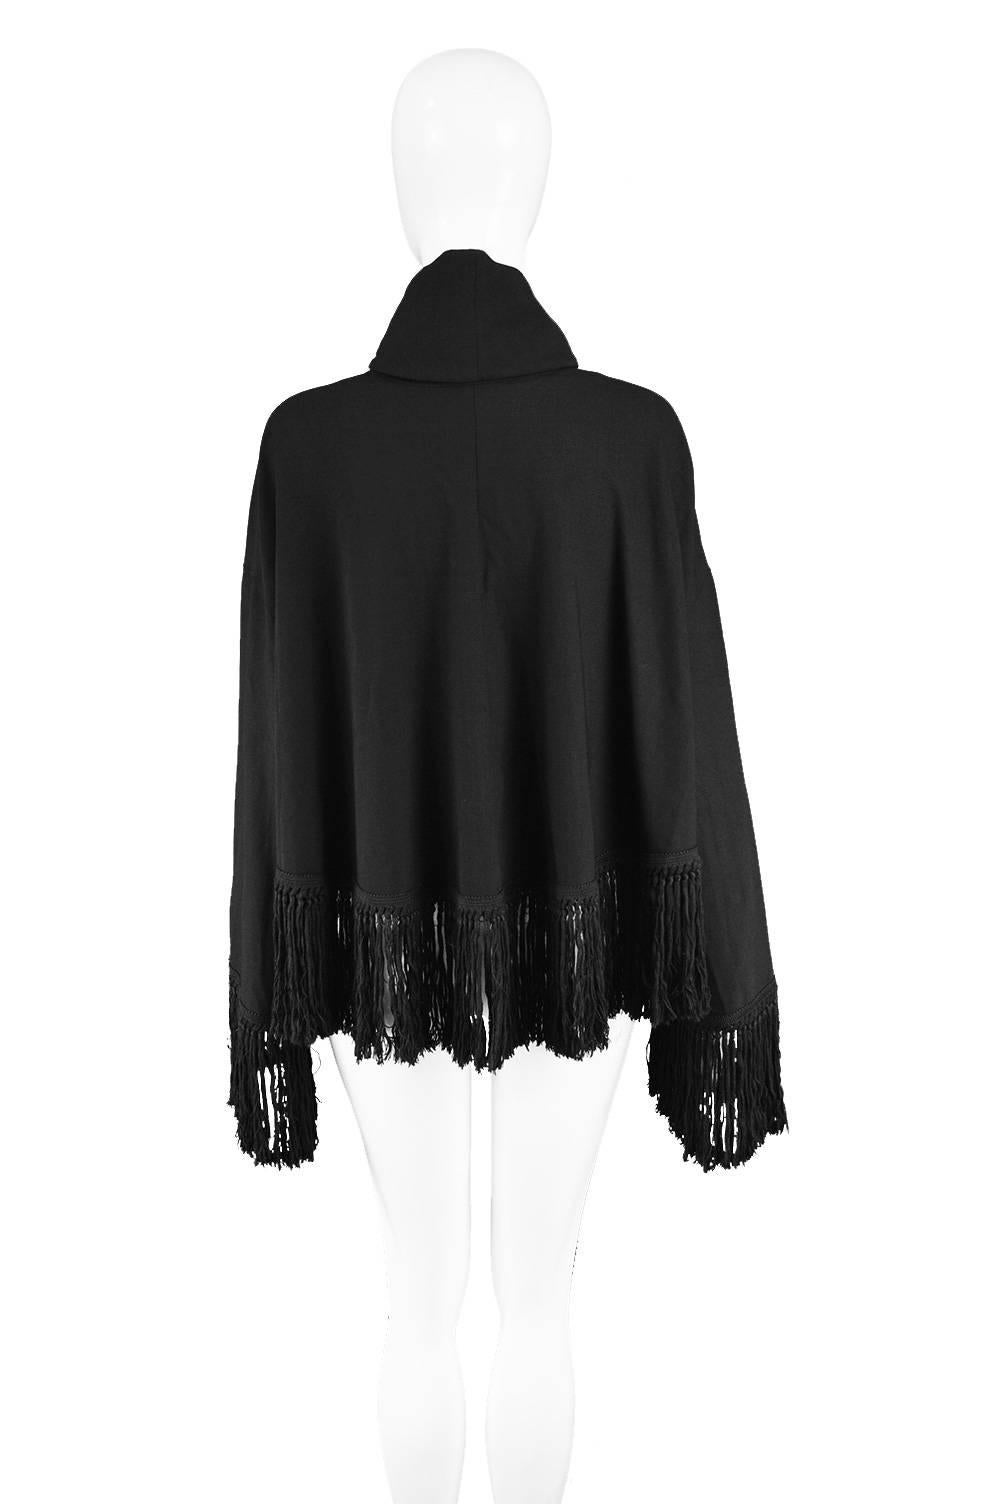 Romeo Gigli for Callaghan Knotted Fringed Black Stretch Wool Jacket, 1990s  For Sale 2